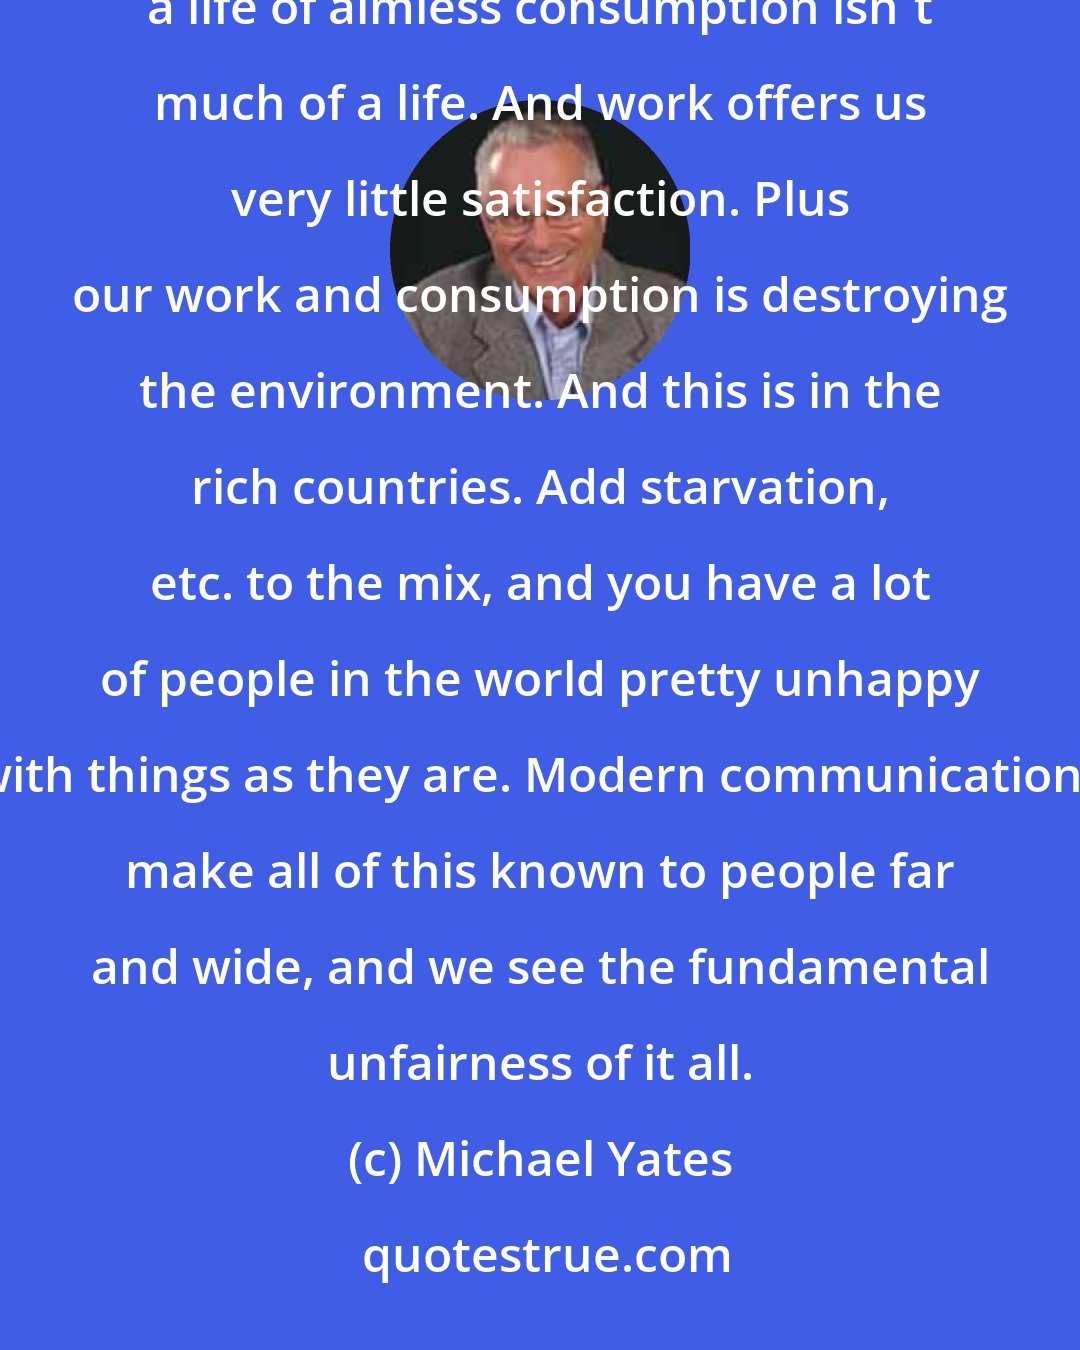 Michael Yates: Life as we know it is fundamentally unsatisfying. I think most folks feel this to be true. They know that a life of aimless consumption isn't much of a life. And work offers us very little satisfaction. Plus our work and consumption is destroying the environment. And this is in the rich countries. Add starvation, etc. to the mix, and you have a lot of people in the world pretty unhappy with things as they are. Modern communications make all of this known to people far and wide, and we see the fundamental unfairness of it all.